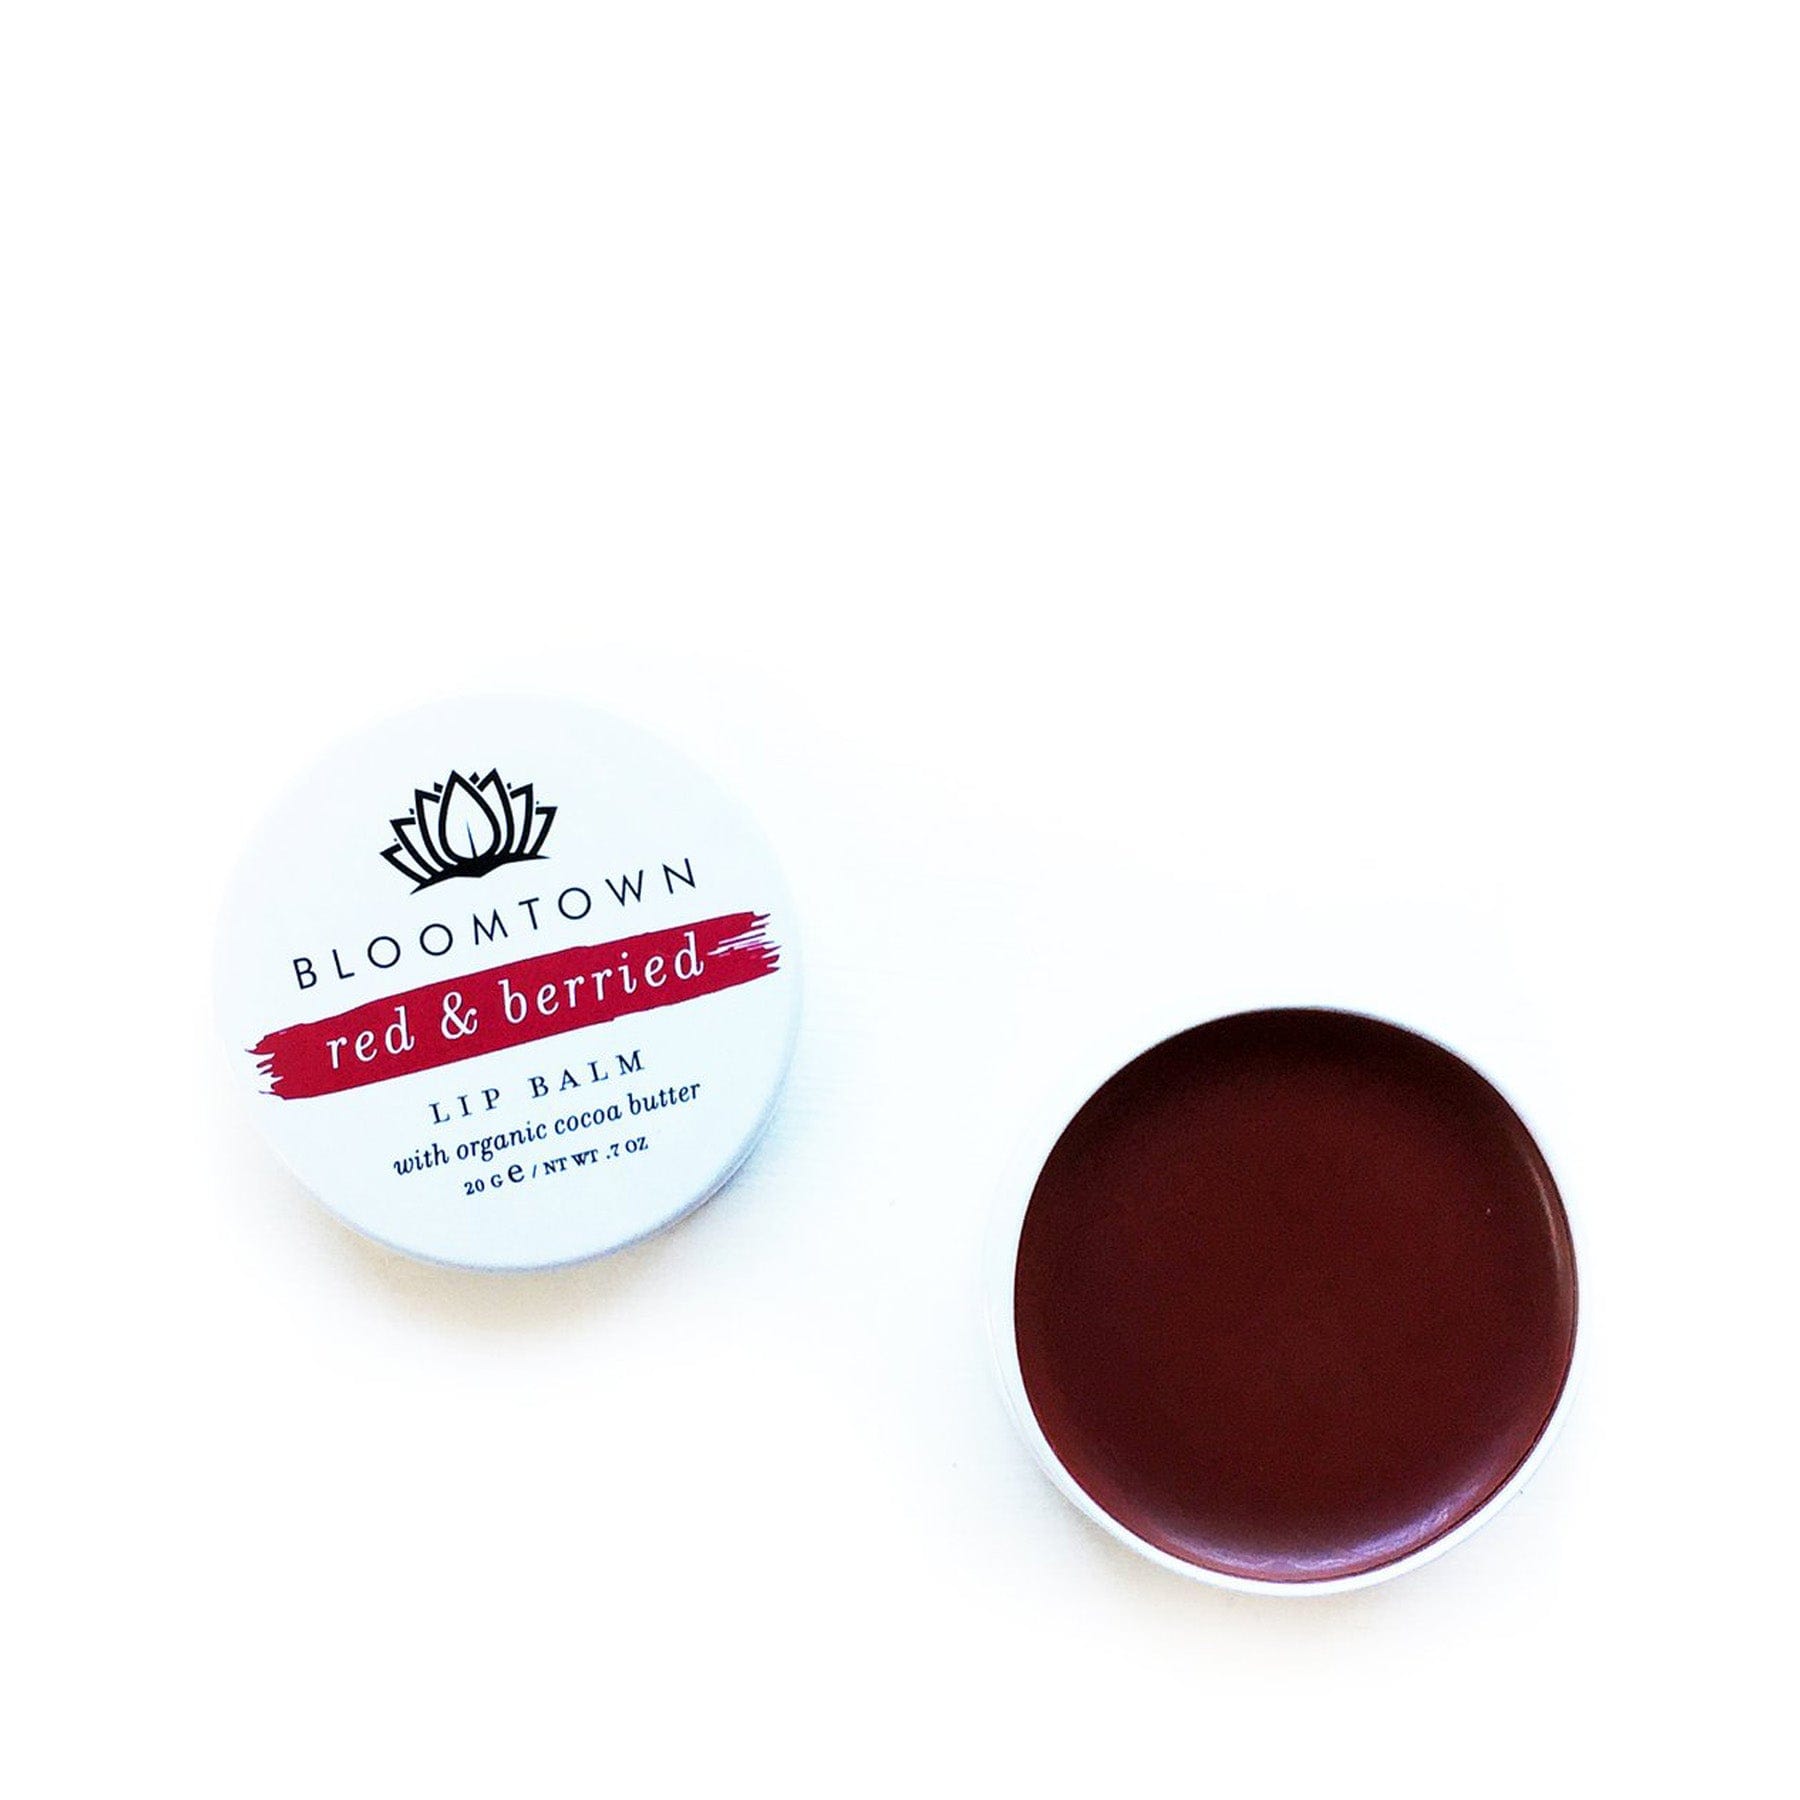 Bloomtown Red & Berried Lip Balm with organic cocoa butter tin on white background, top view of open lip care product